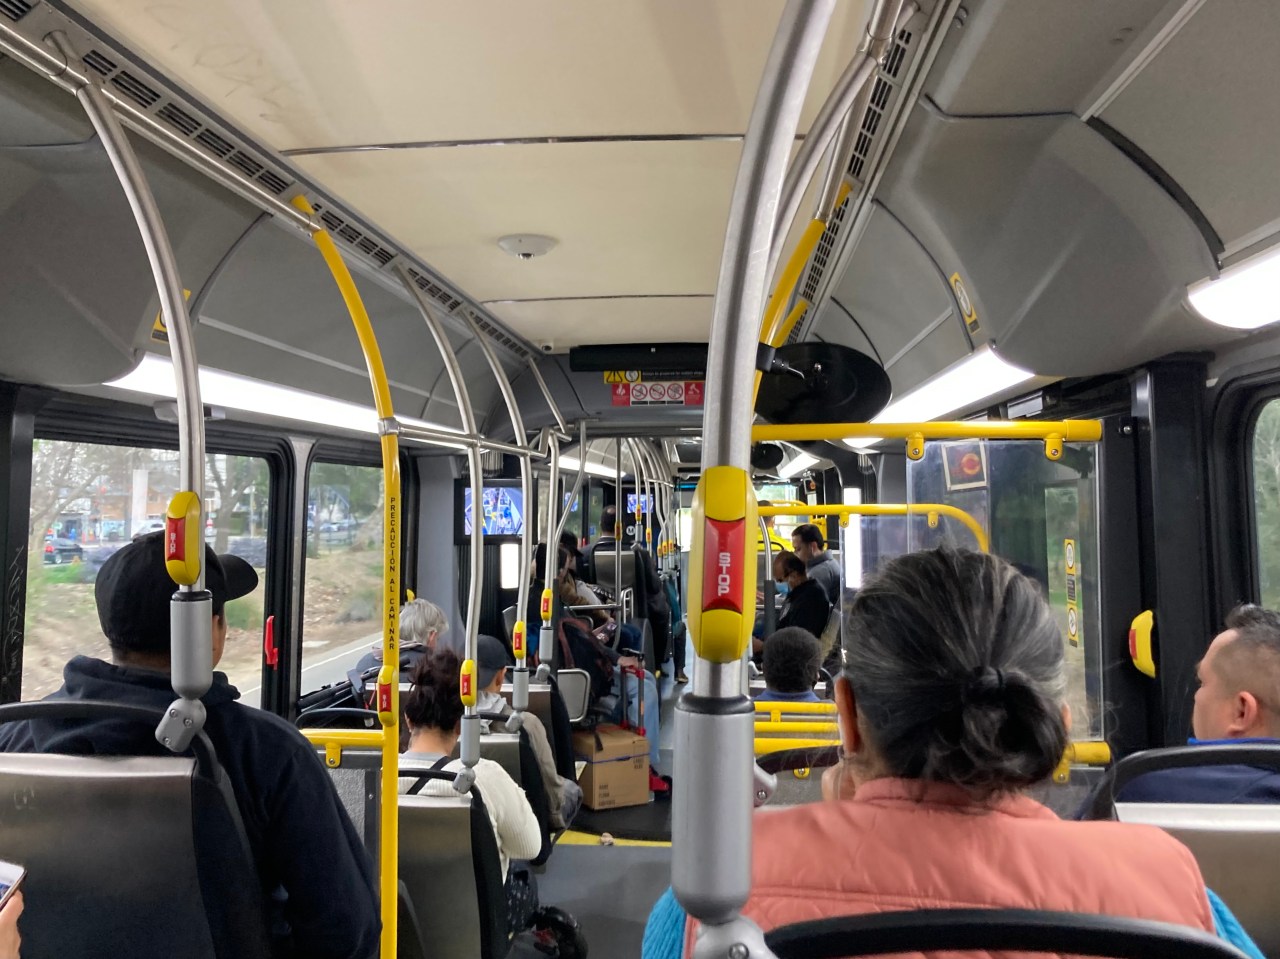 Onboard an Orange Line articulated bus. Surveillance camera monitors inside the bus remind passengers their actions are being filmed, which may help deter crime. Photo: John Greenfield